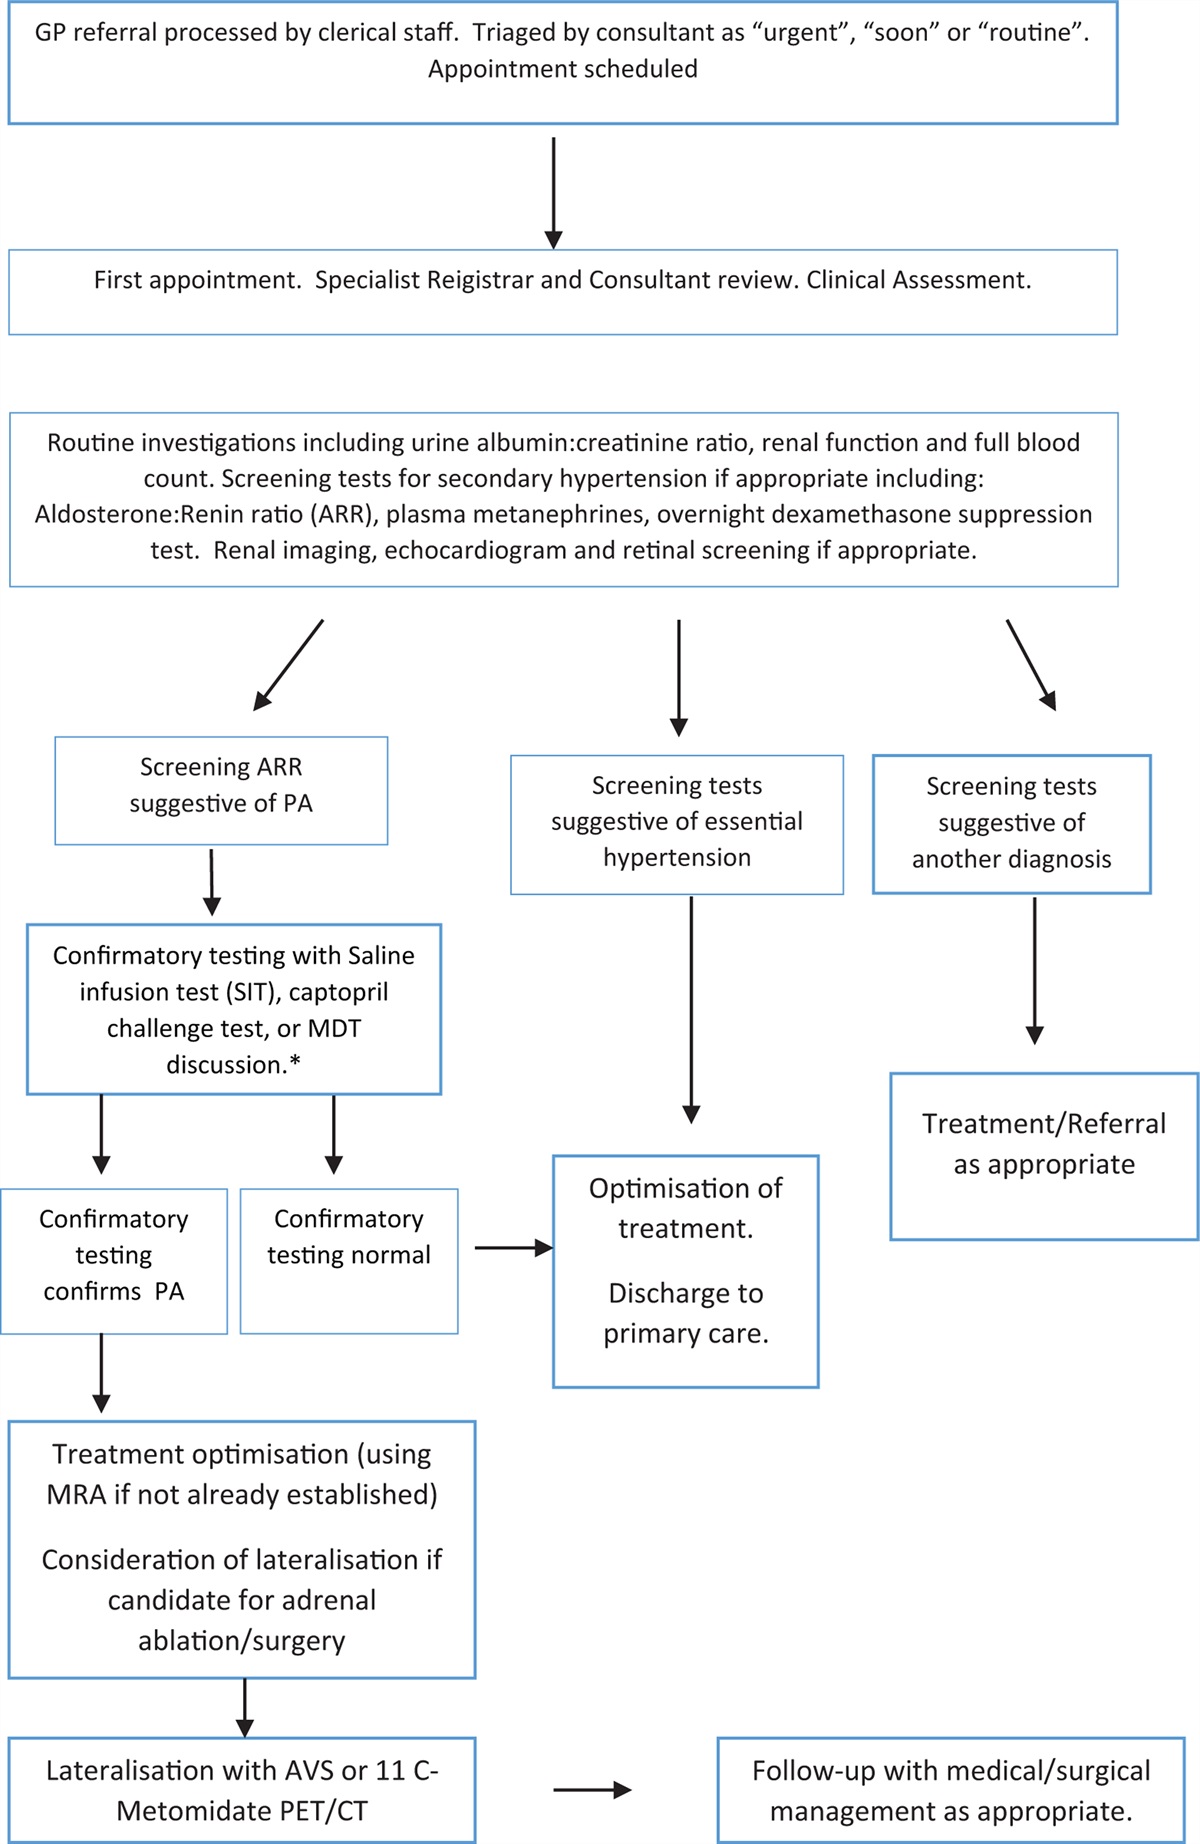 A cost-analysis of managing secondary and apparent treatment-resistant hypertension in a specialist multidisciplinary hypertension clinic